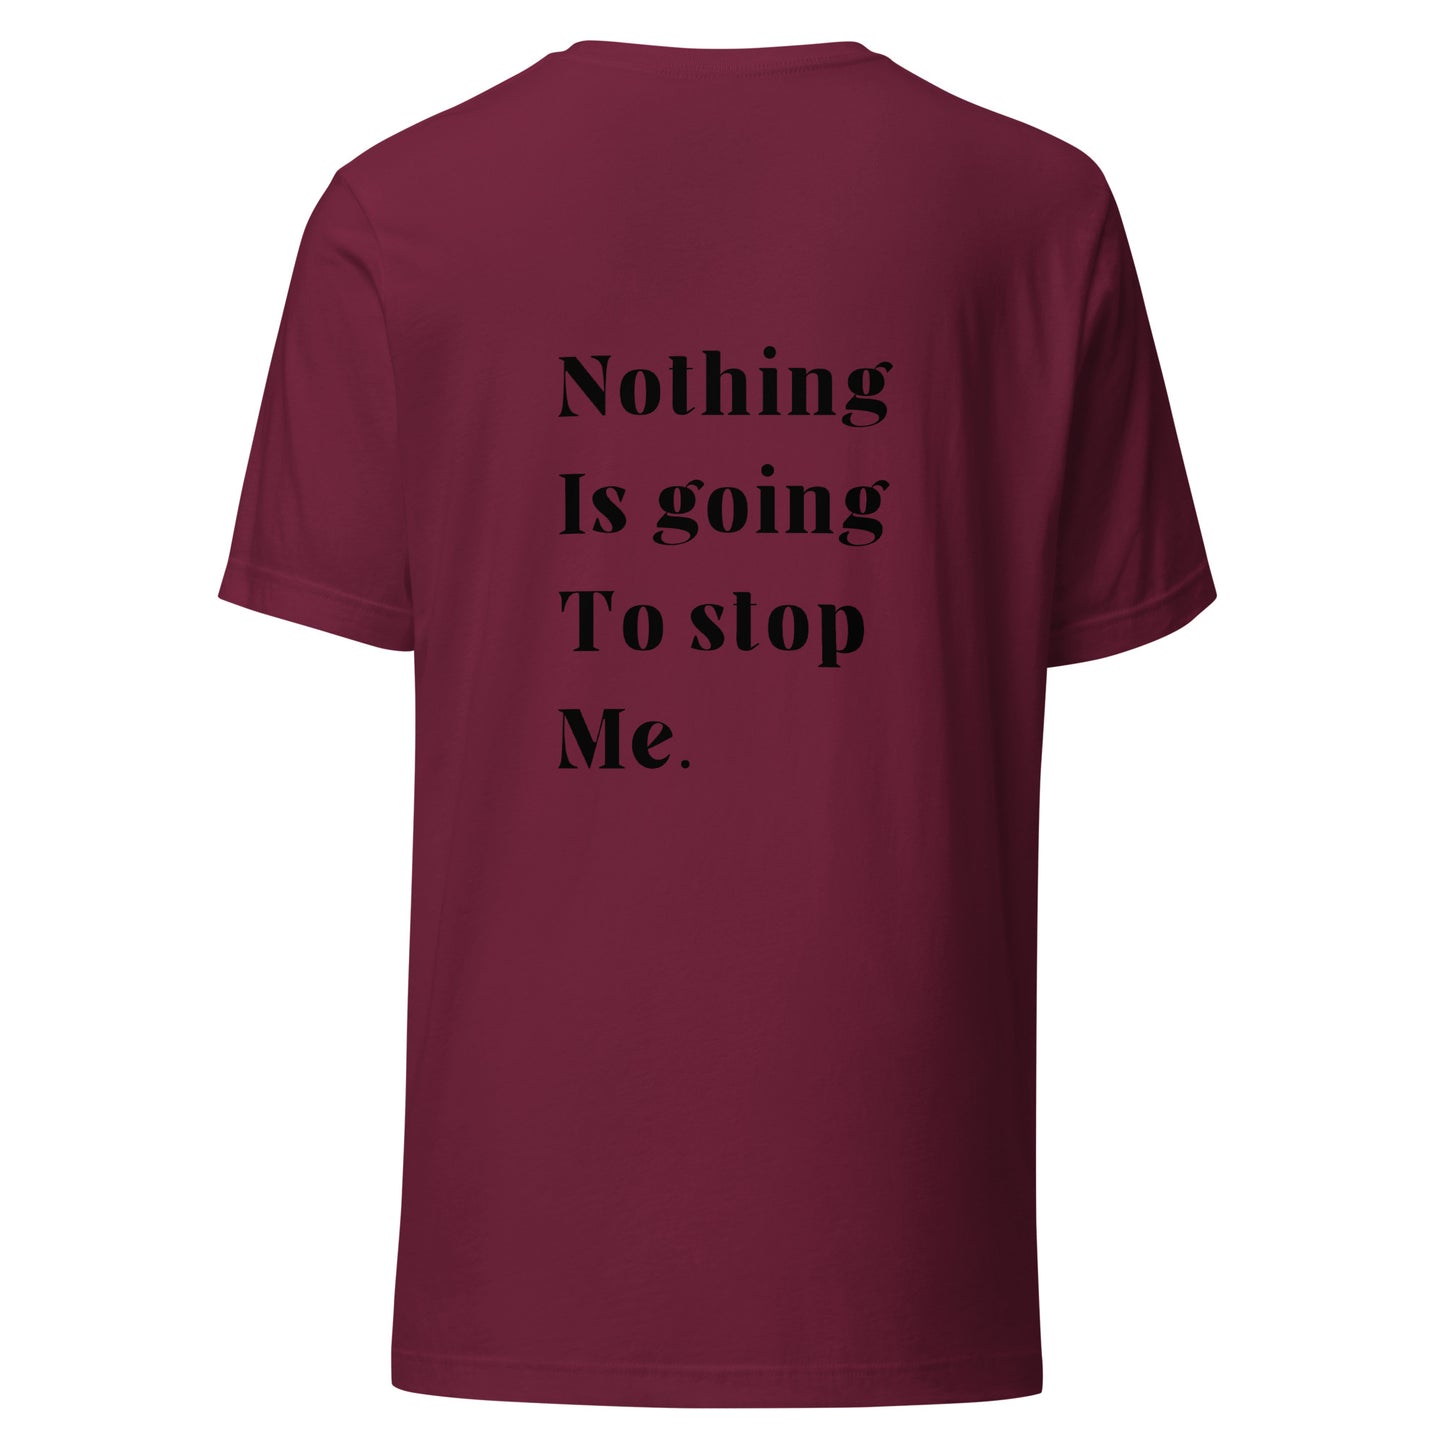 Nothing is going to stop me - Unisex t-shirt